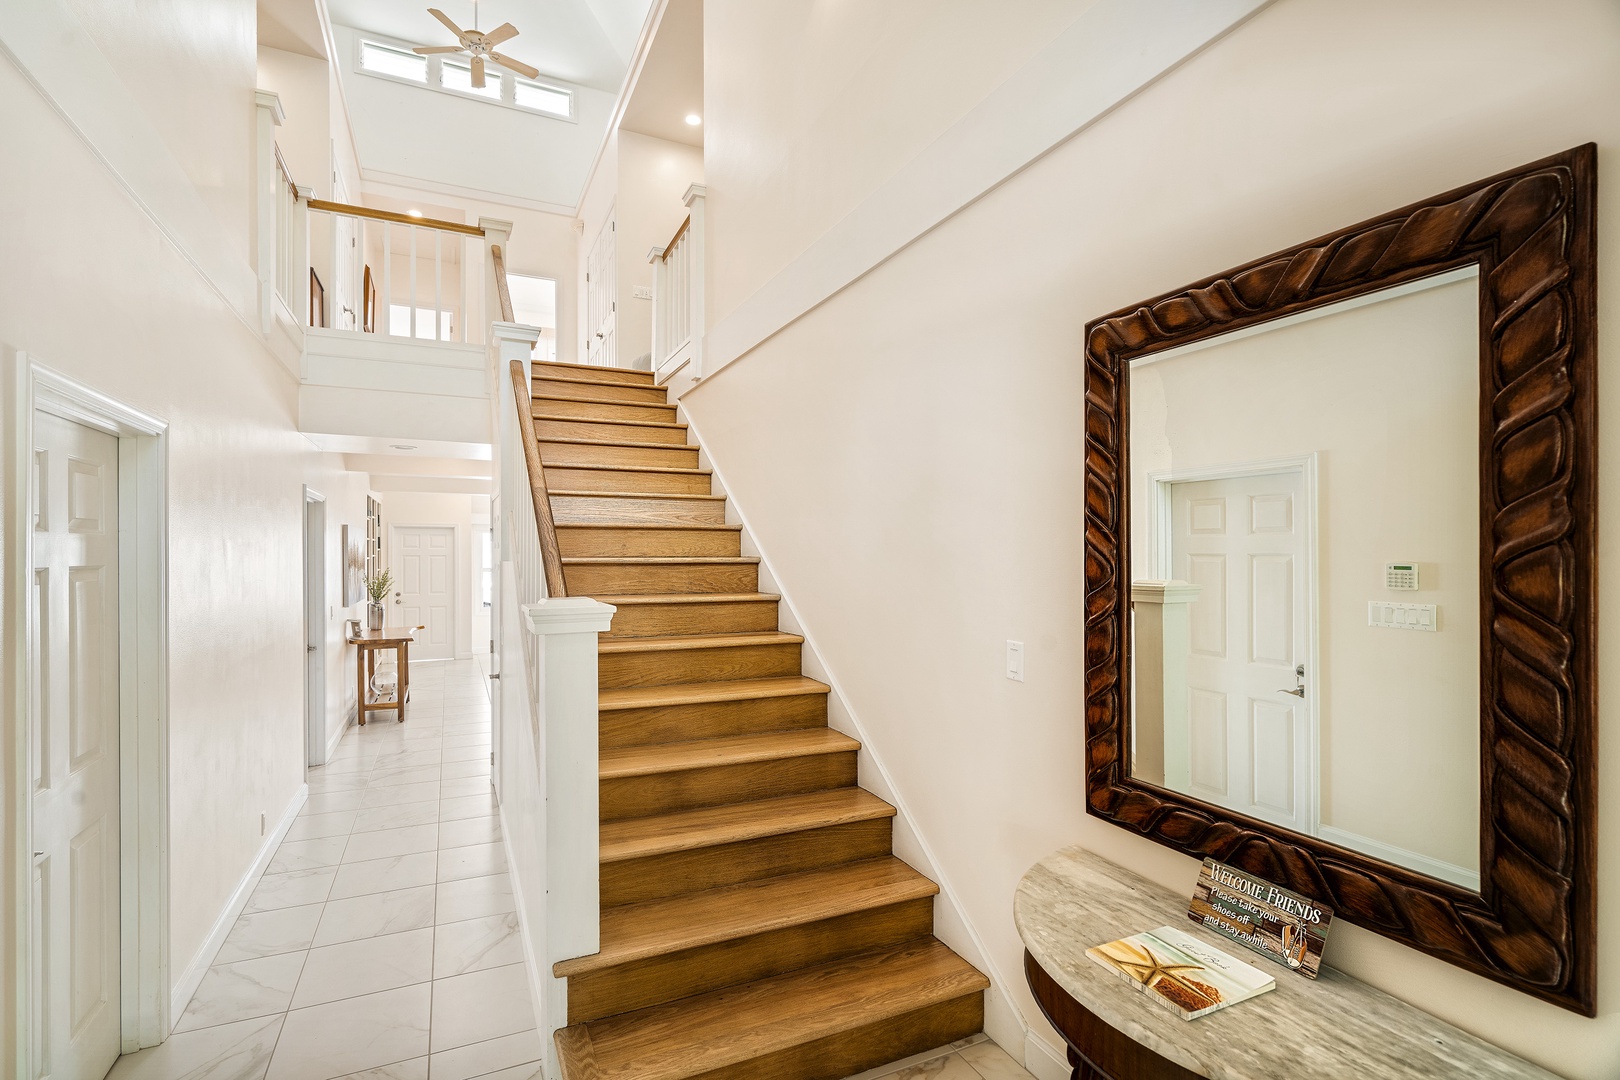 Kailua Kona Vacation Rentals, Dolphin Manor - Grand stairway leading to the 4 upstairs bedrooms